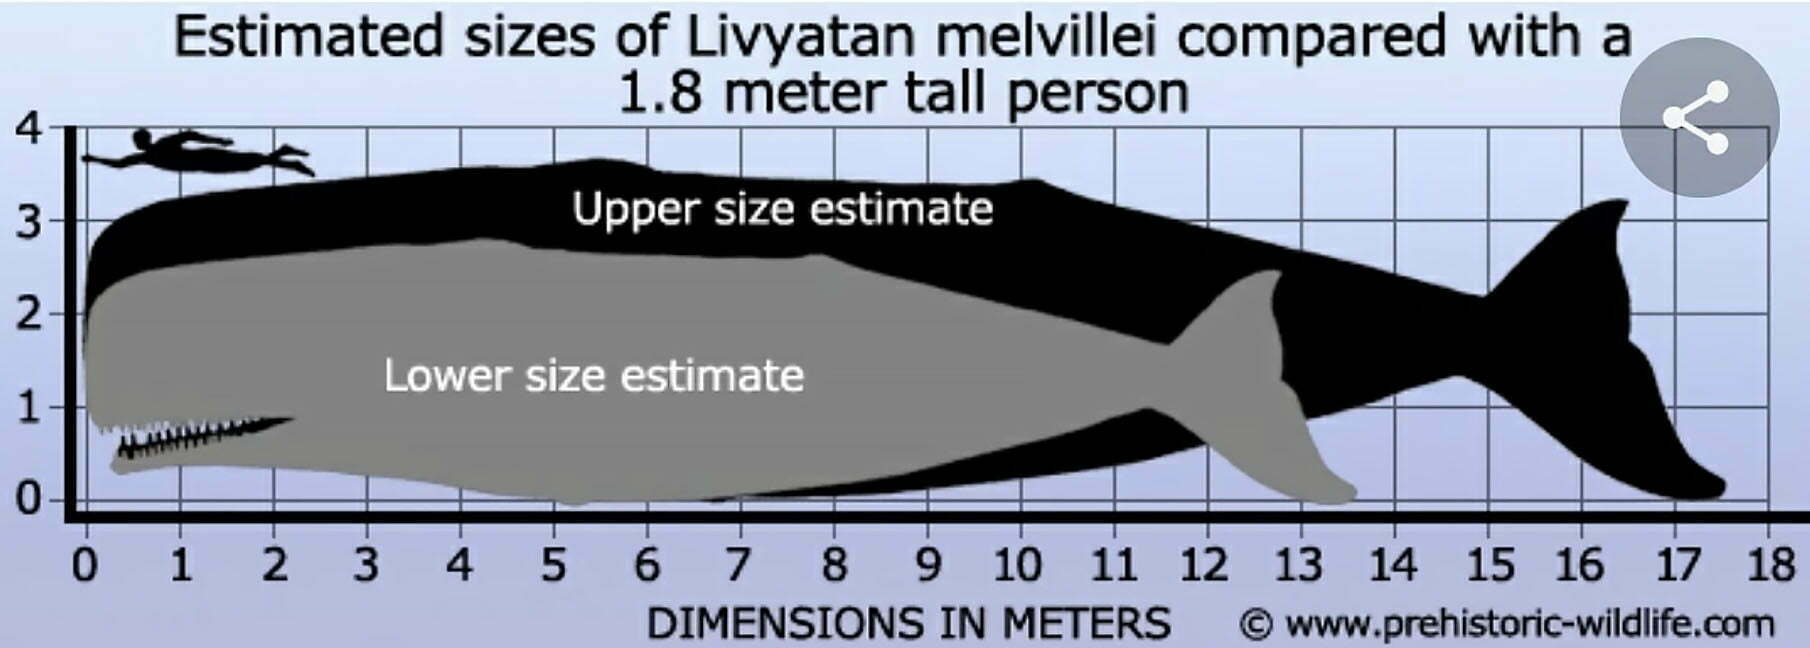 Moby dicks length compared to a megalodons length